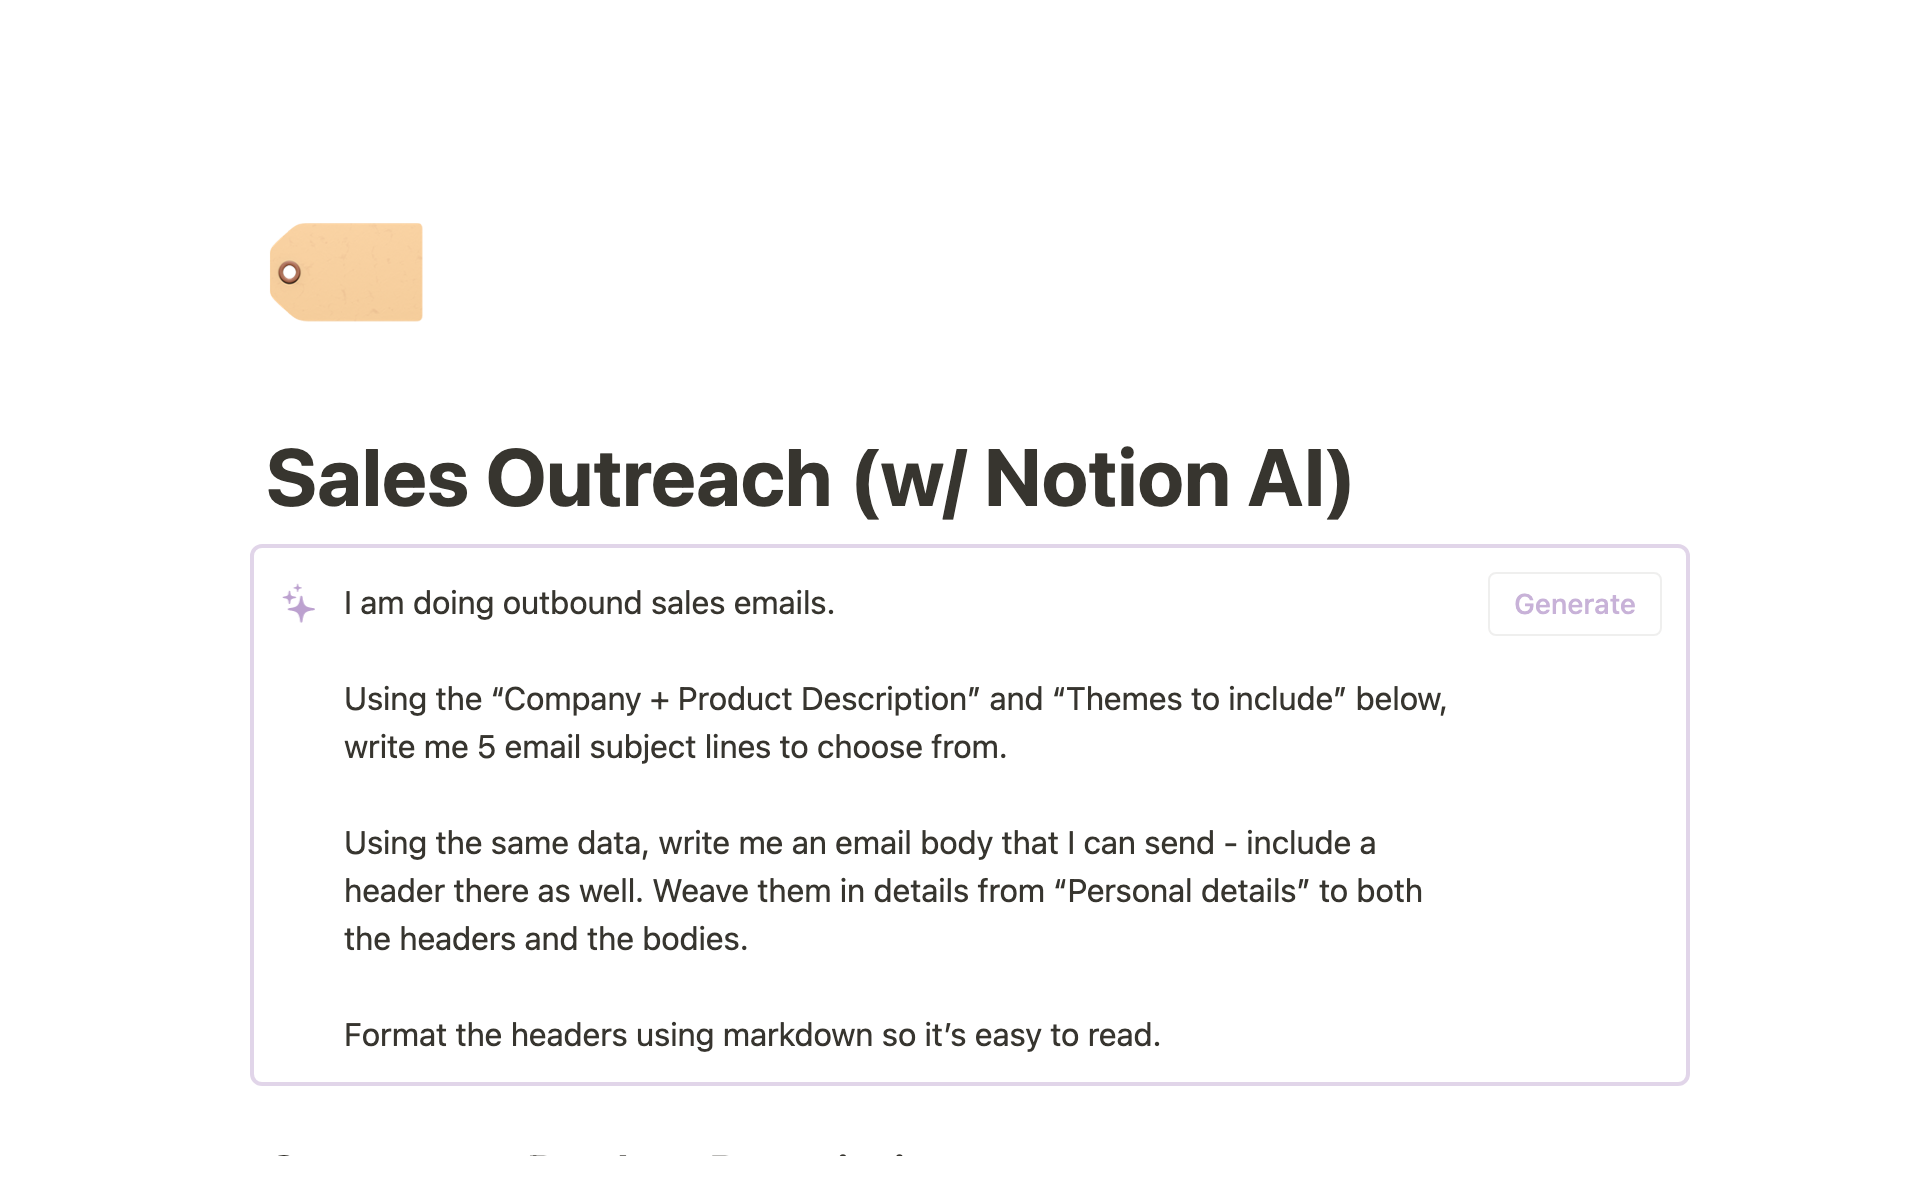 Landing new customers can be a challenge — Notion AI can help you quickly generate email copy with a personal touch to close the deal.